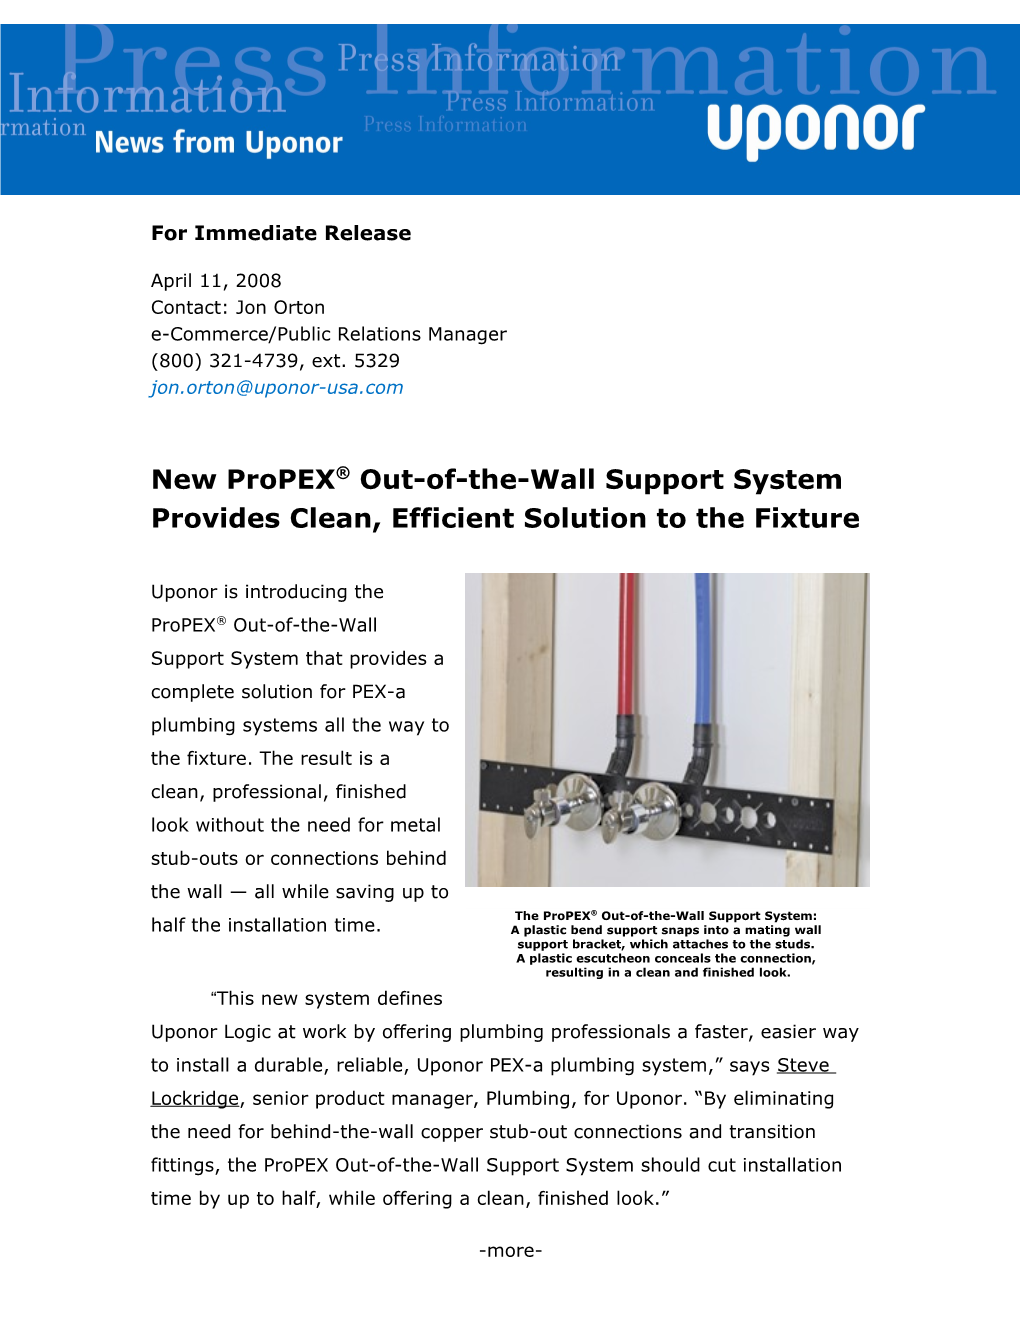 Uponor Propex Out-Of-The-Wall Support System